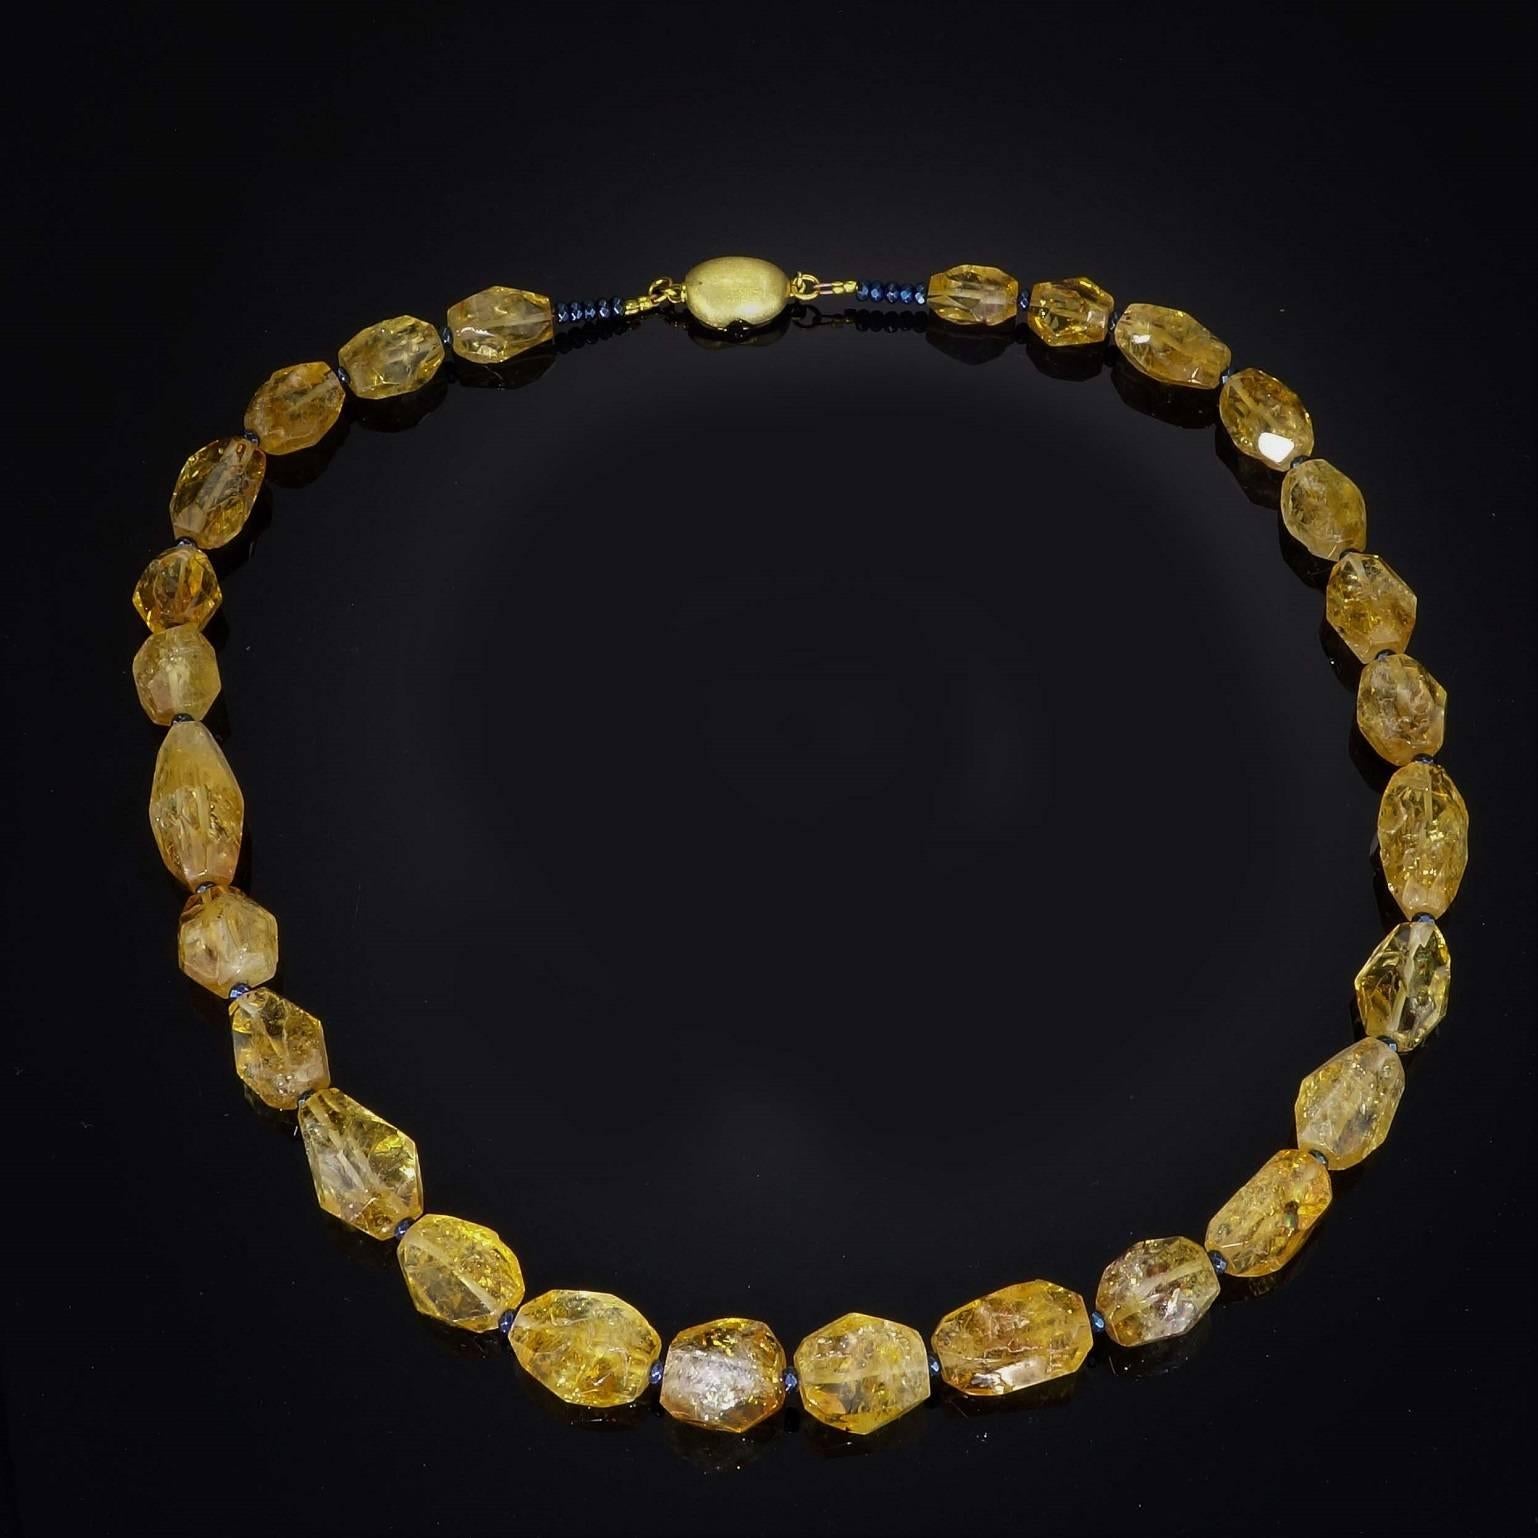 Polished Faceted Citrine Chunk Necklace.  Lots of Sparkle in this Golden Honey colored Necklace, the citrines vary in size 10-22mm. These Citrines have all the natural inclusions typical of this type of gemstone. Faceted teal spacers enhance the